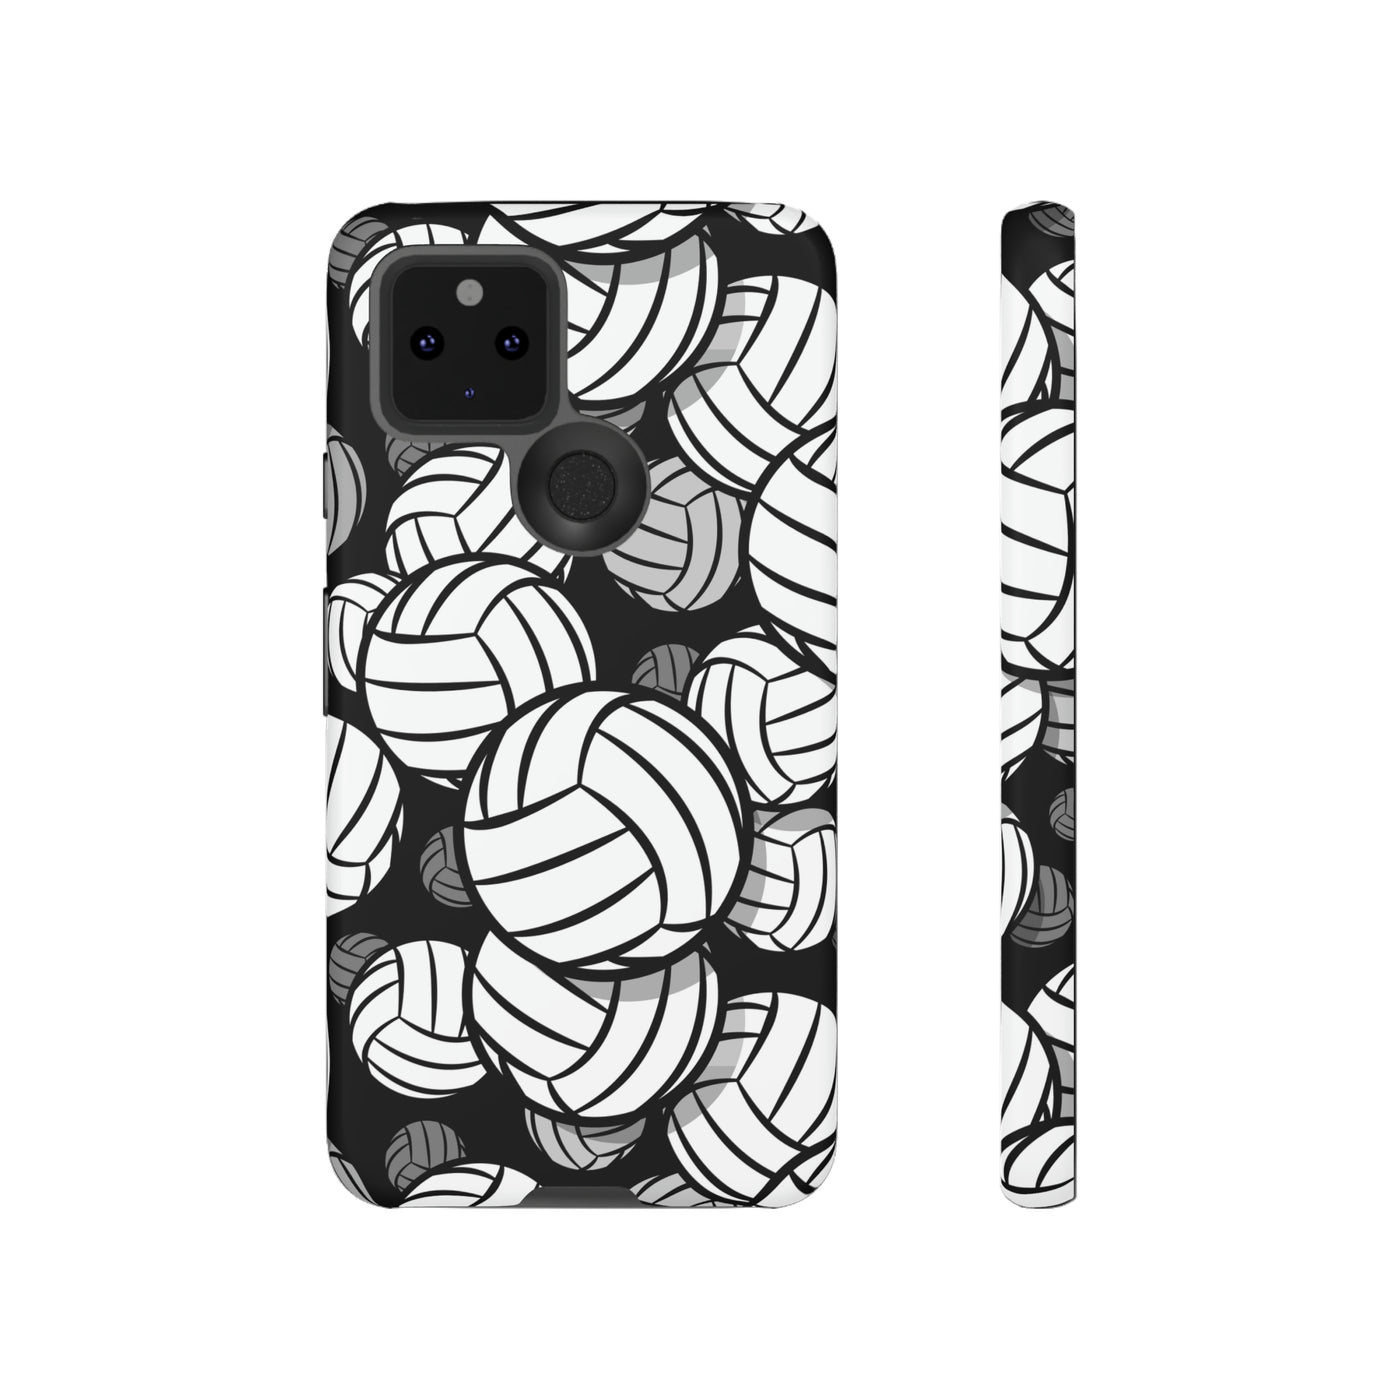 Volleyball Case